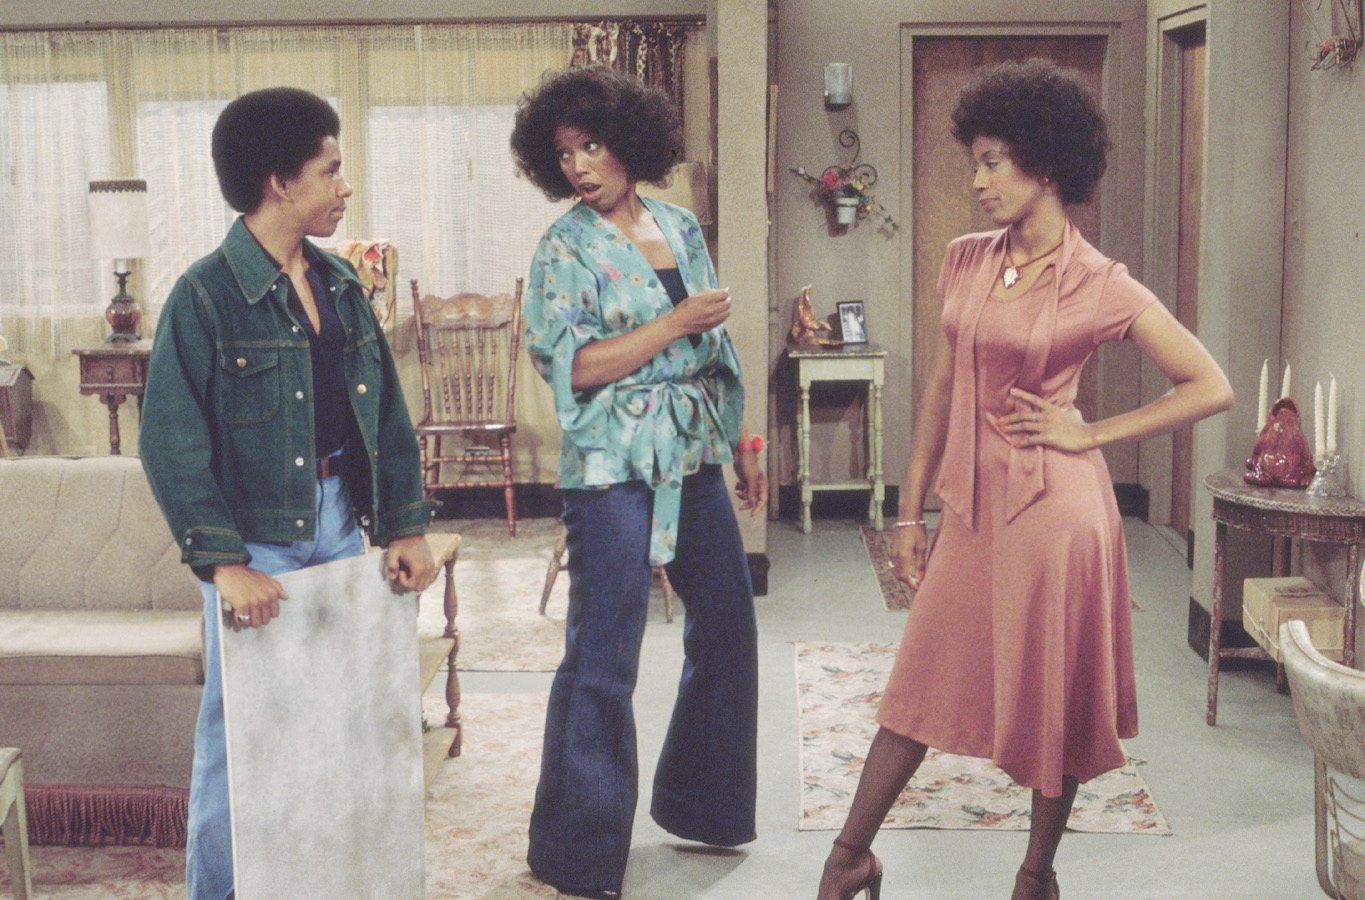 Ralph Carter, Ja'net DuBois, and Bern Nadette Stanis in a scene from 'Good Times'